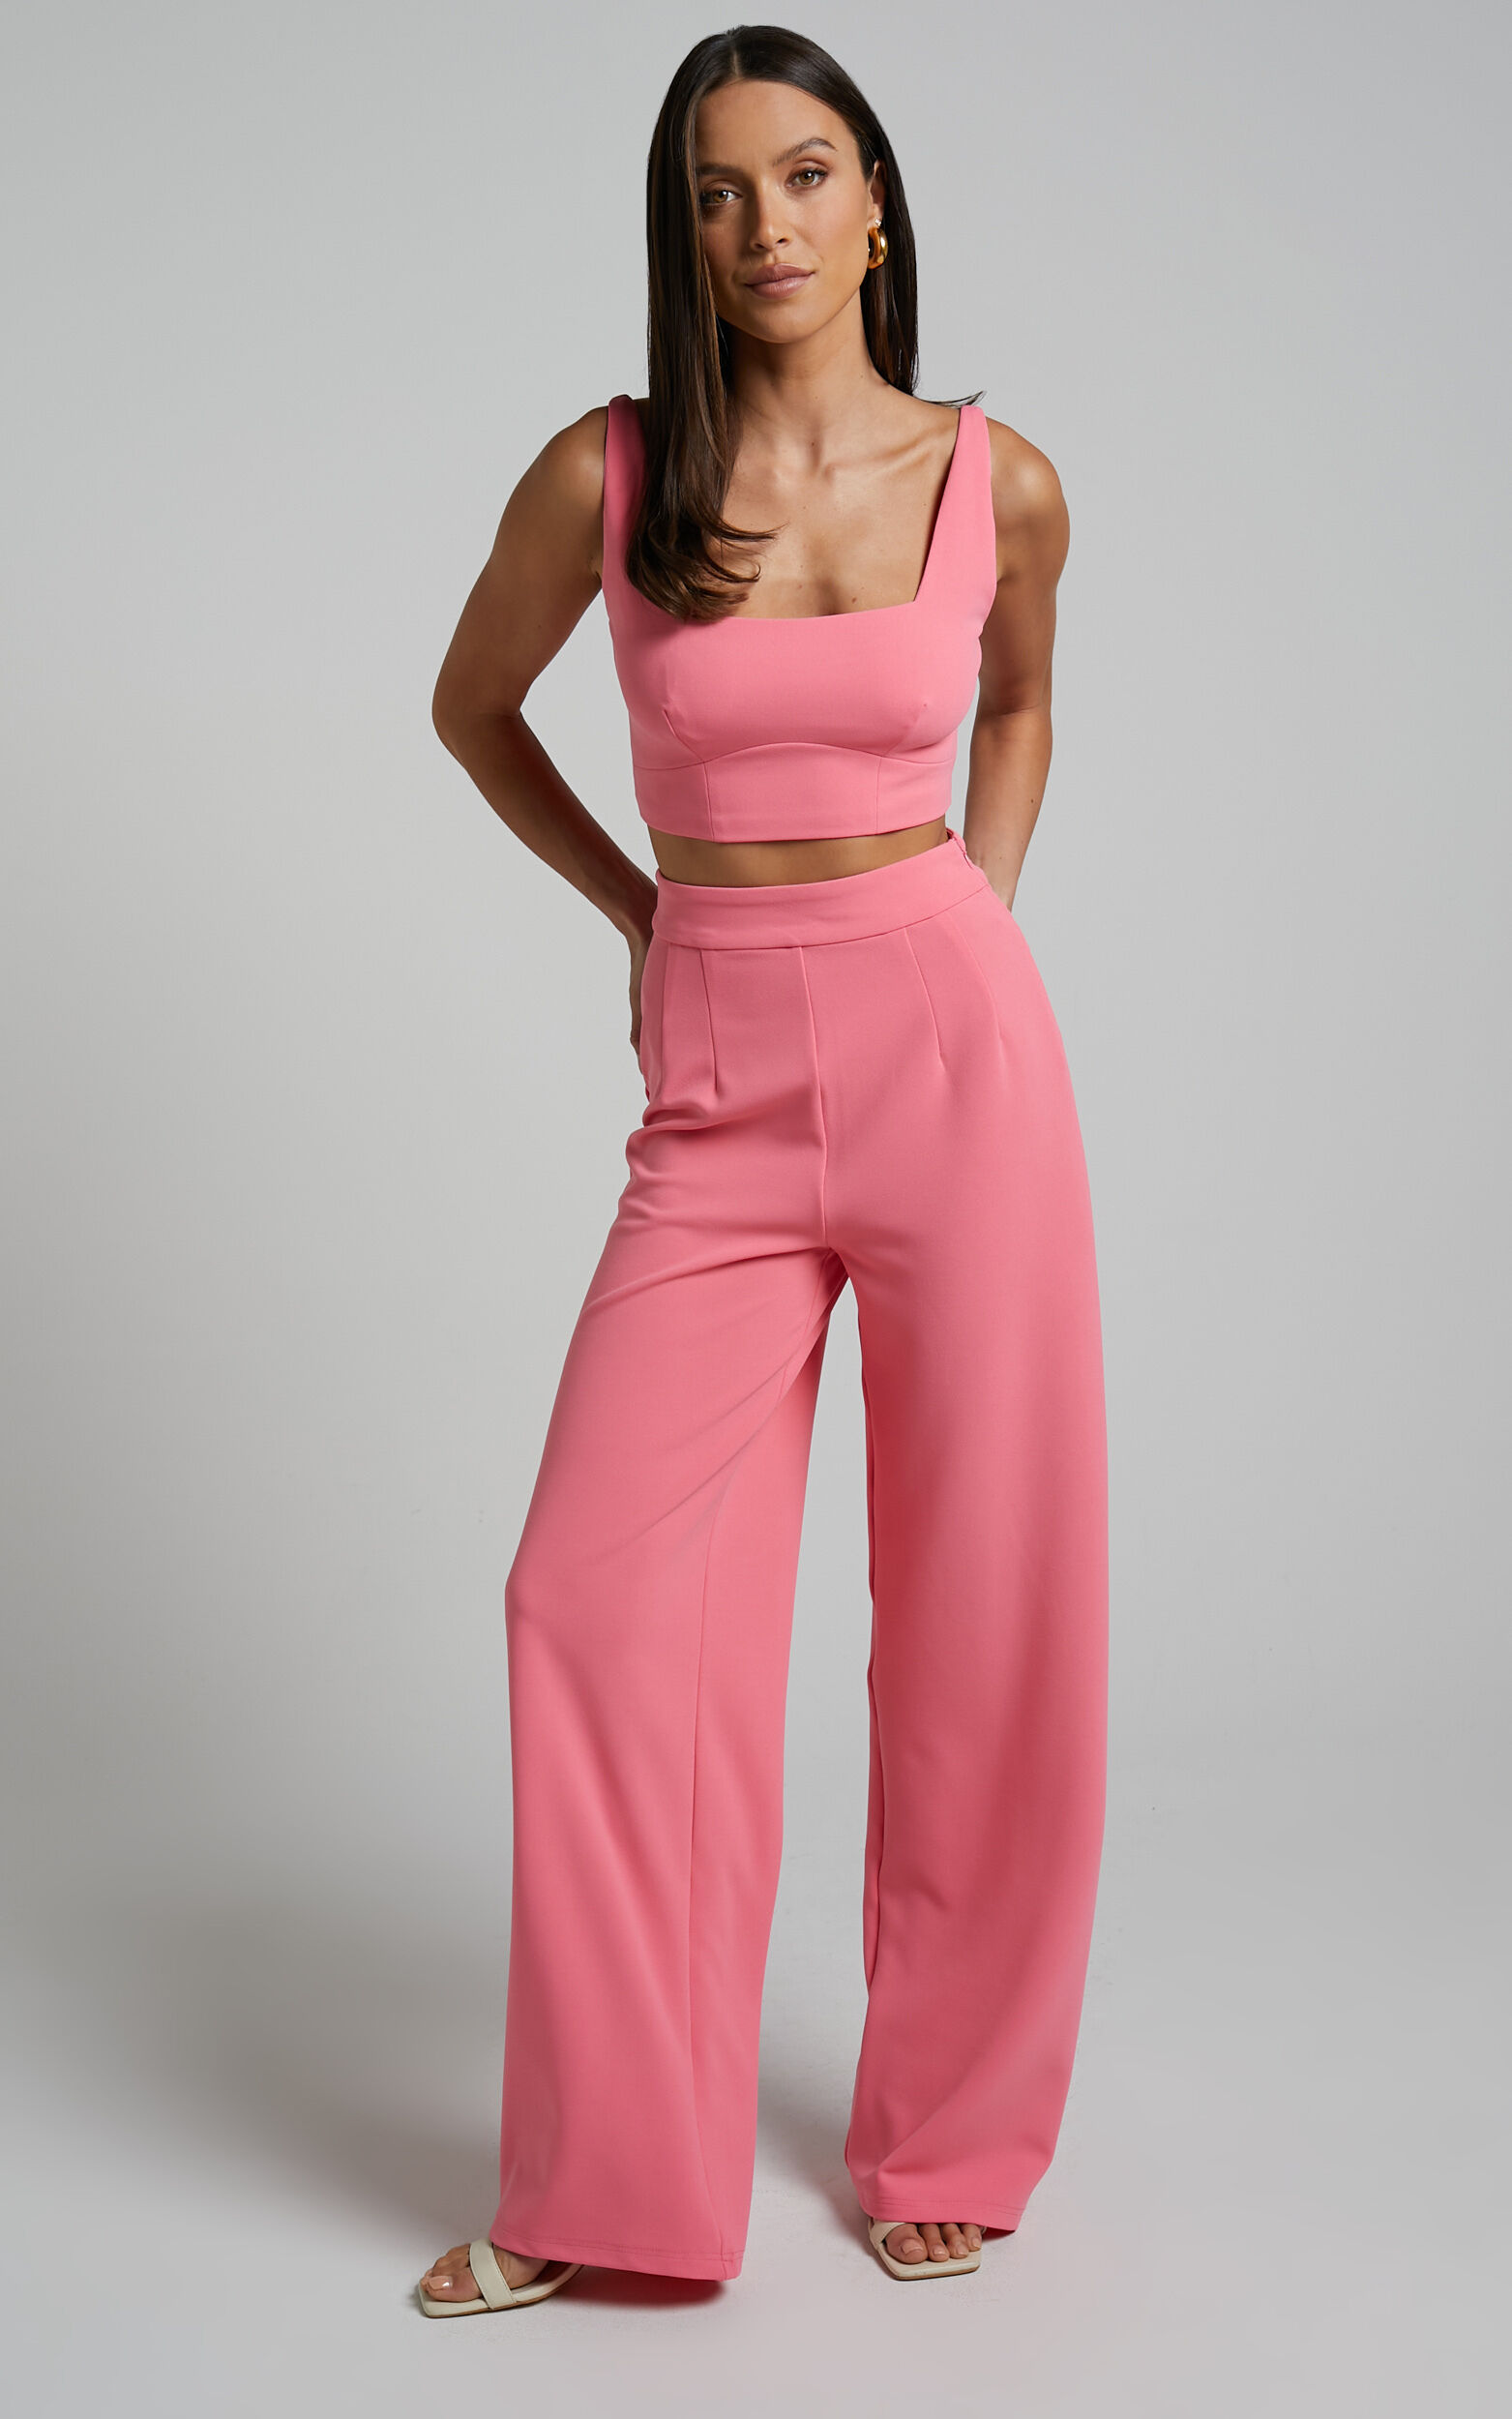 Elibeth Two Piece Set - Crop Top and High Waisted Wide Leg Pants